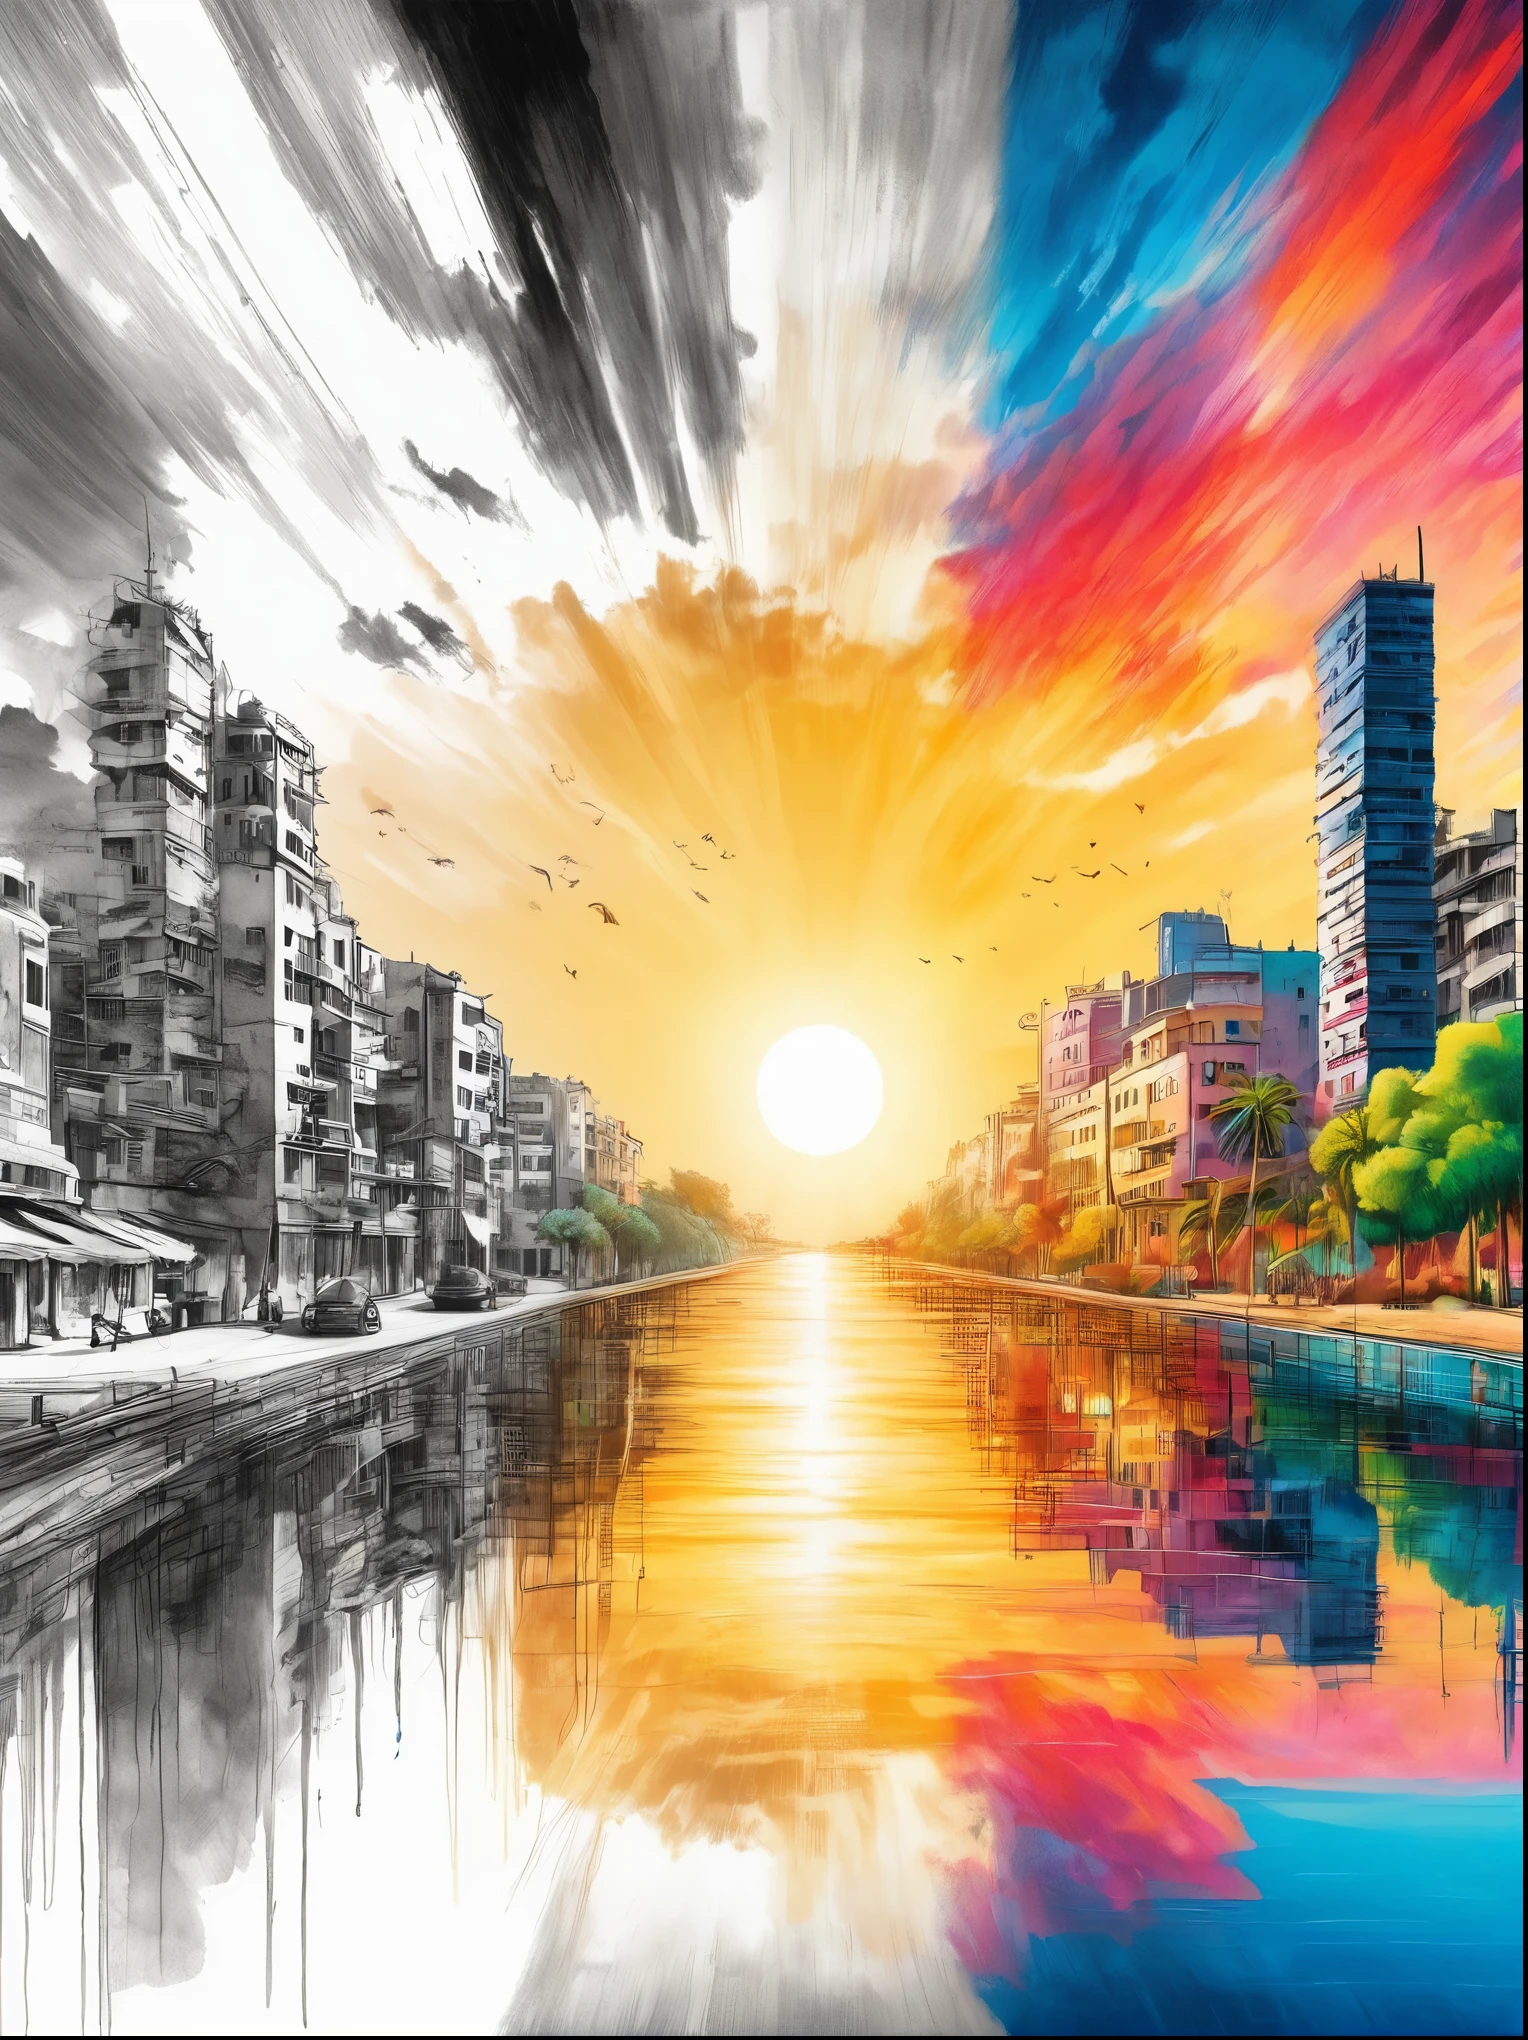 (The left half is a black and white line drawing of the war-torn and ruined city of Gaza:1.3), (The right half is a beautiful and pleasant city with tall buildings, bright sunshine and bright colors:1.5), ((The artwork should transition from a pencil drawing style in black and white on the left half to vibrant colors on the right half, Ensure a seamless integration between the two halves without any dividing line, with the left side featuring detailed black and white pencil strokes and the right side filled with colors, creating a harmonious blend across the image)), excellent quality, Detailed background, The art of math